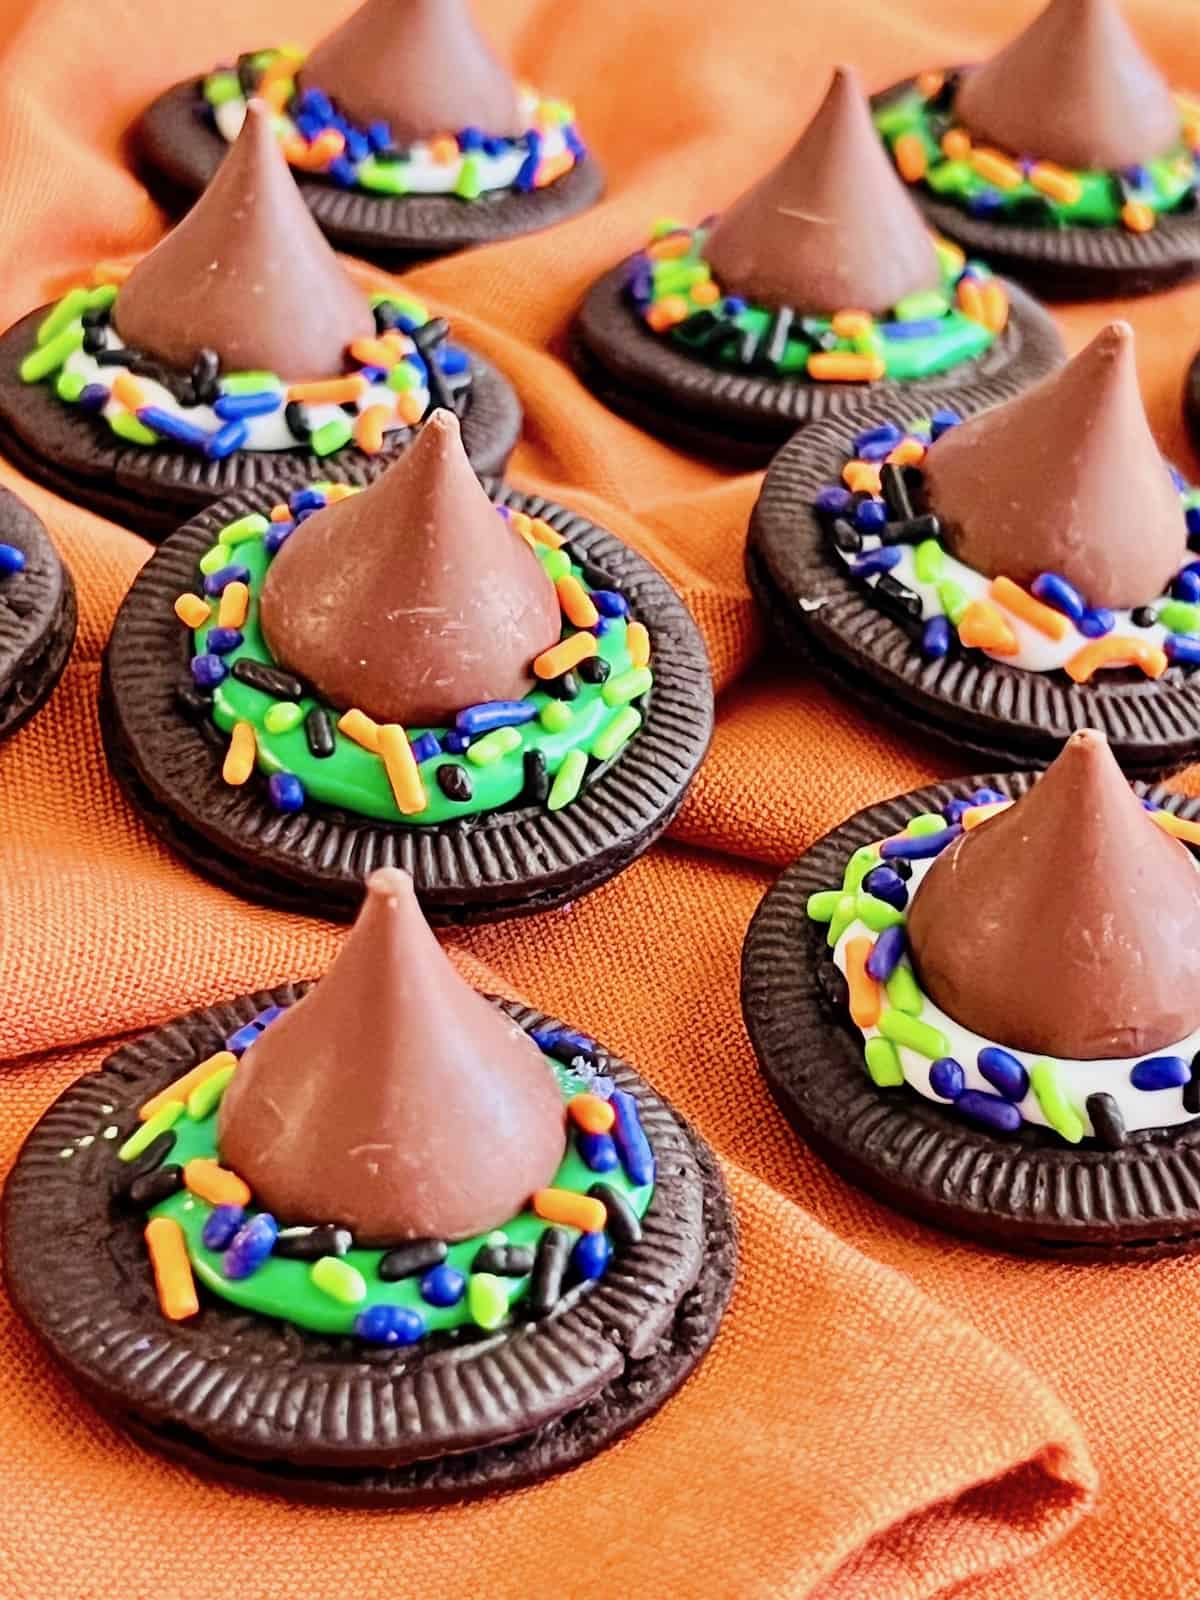 Oreo Cookies decorated to look like Halloween Witch Hats On an orange cloth napkin.